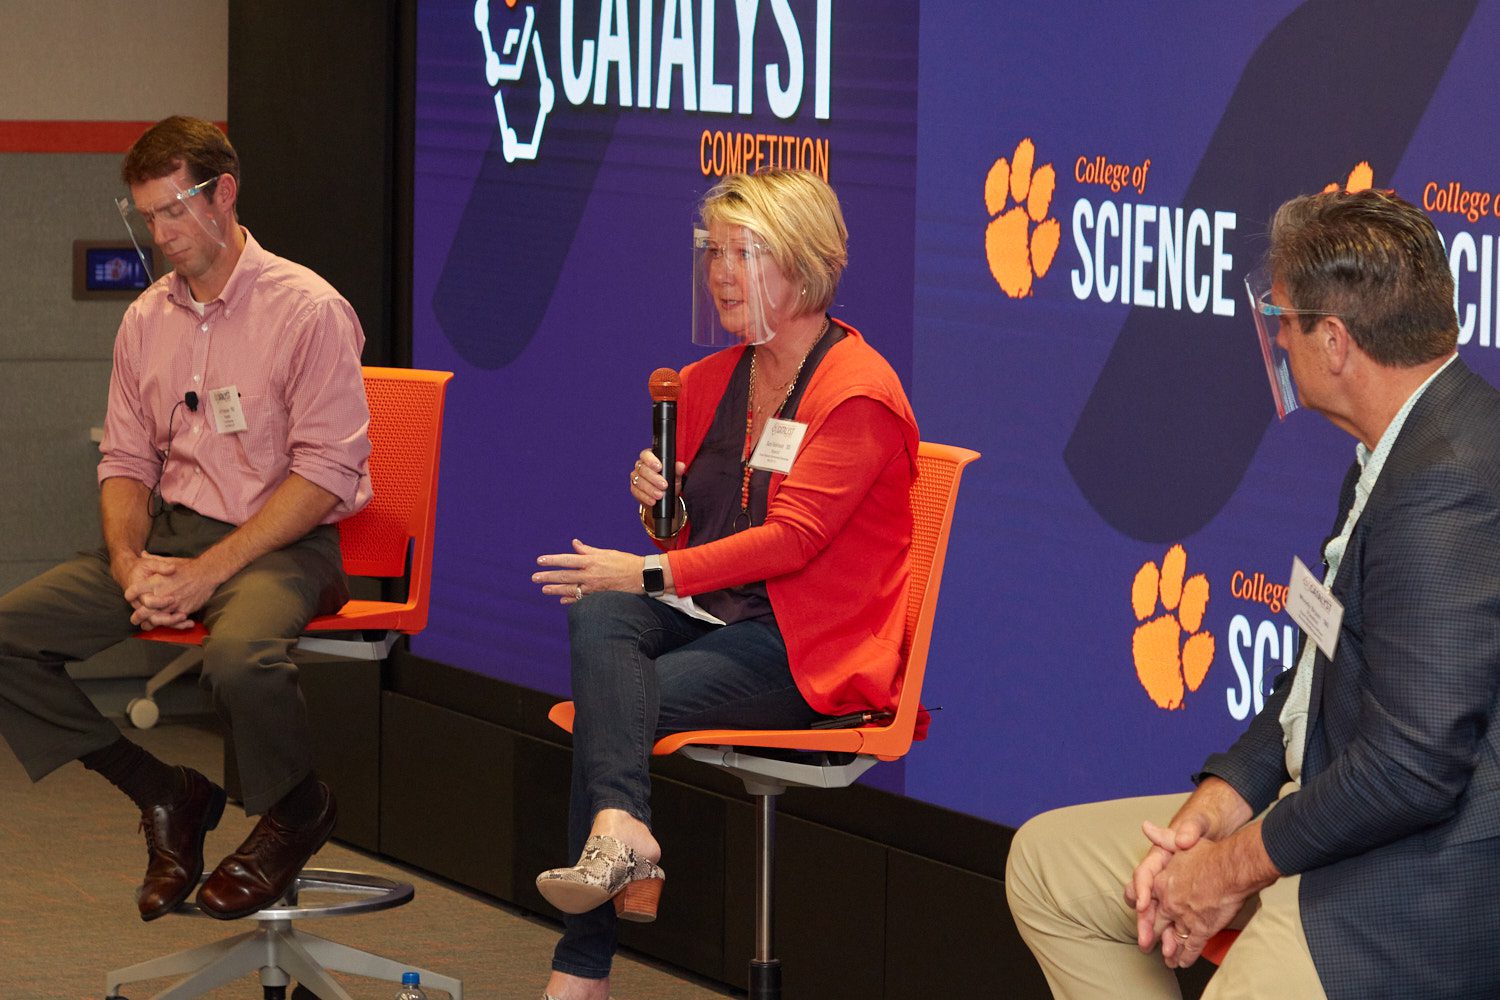 Three people sitting in tall orange chairs ion stage at College of Science's Catalyst Competition kickoff event.